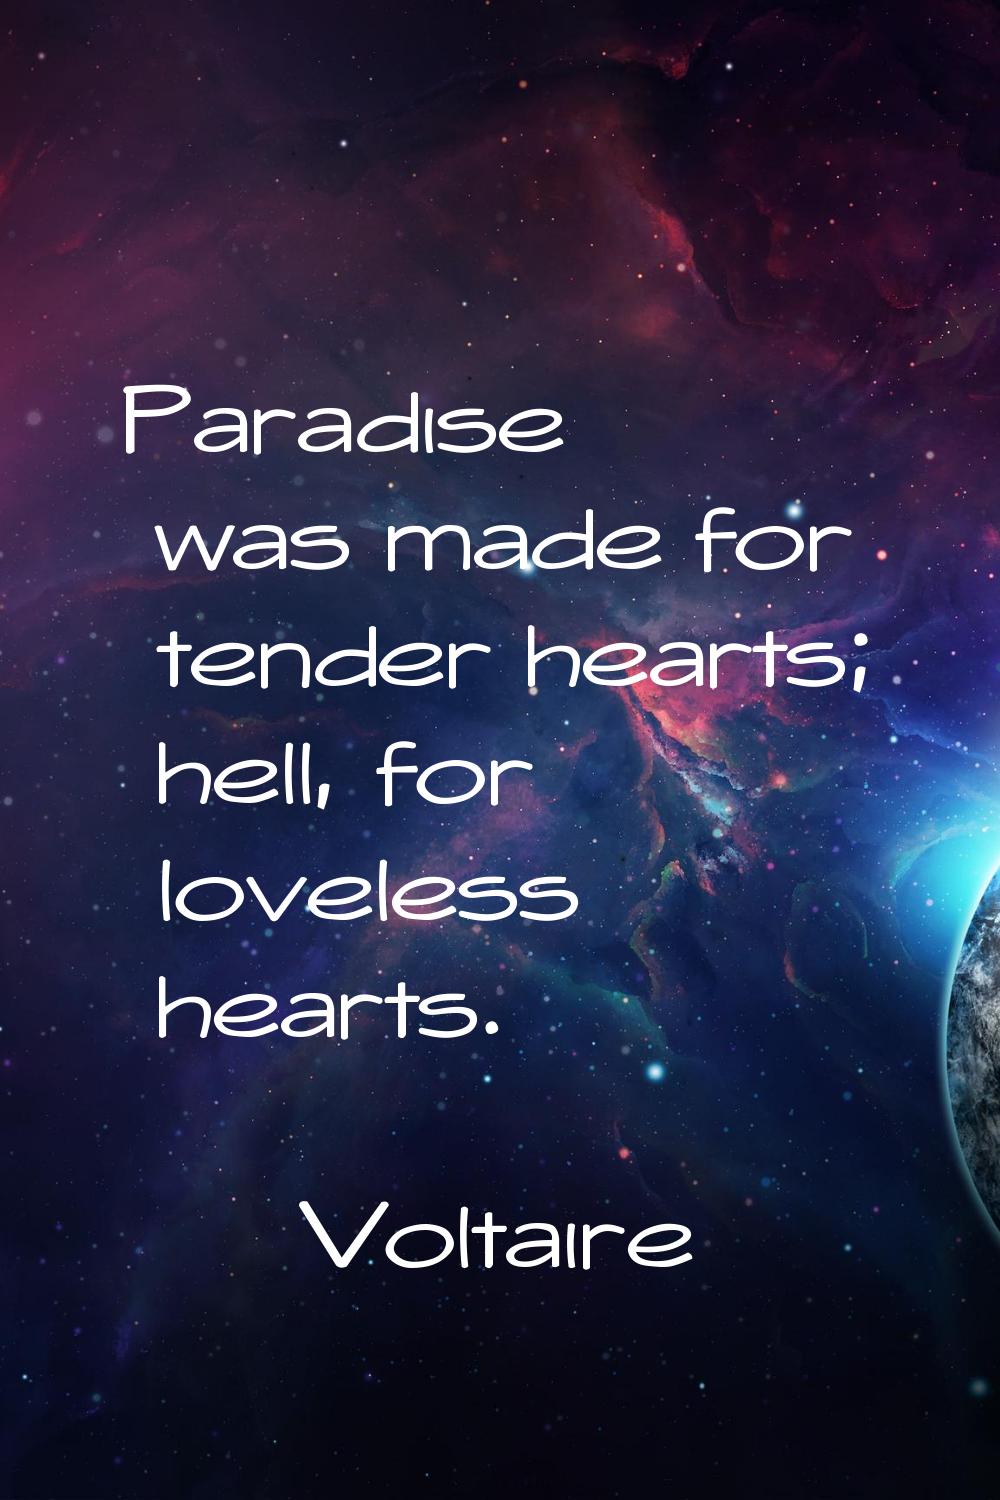 Paradise was made for tender hearts; hell, for loveless hearts.